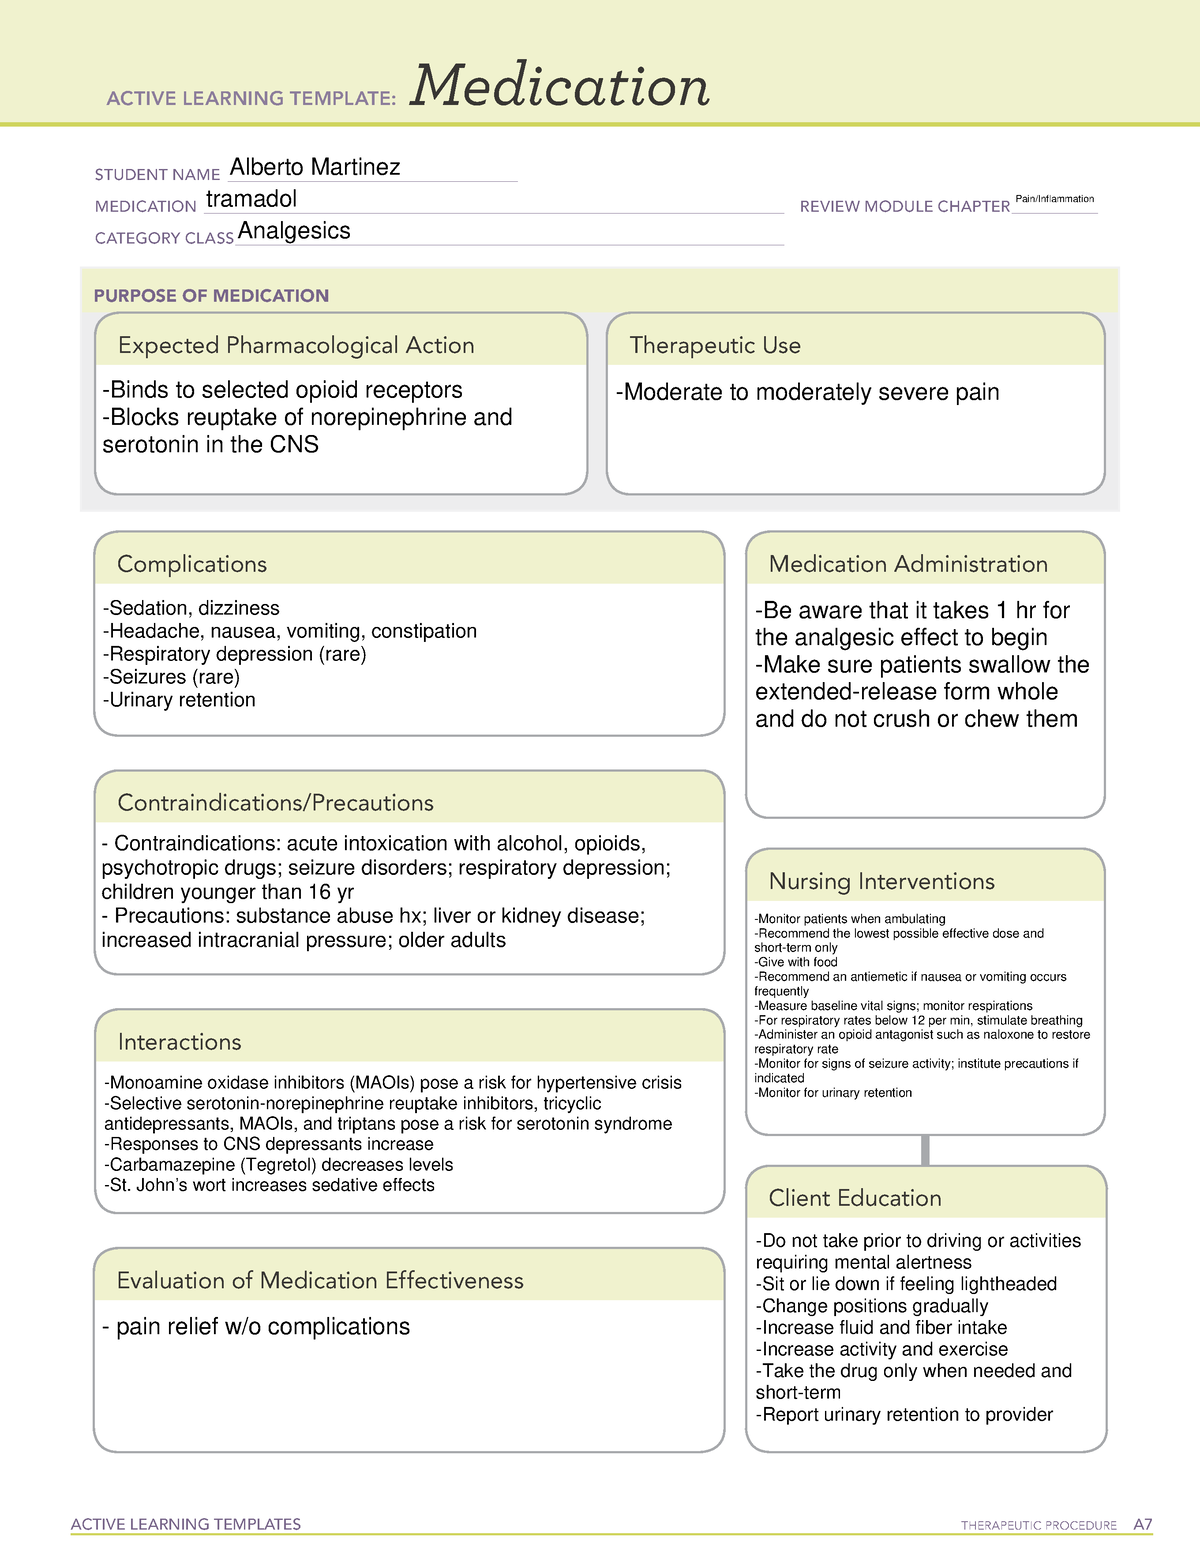 ati-medication-template-tramadol-active-learning-templates-therapeutic-procedure-a-medication